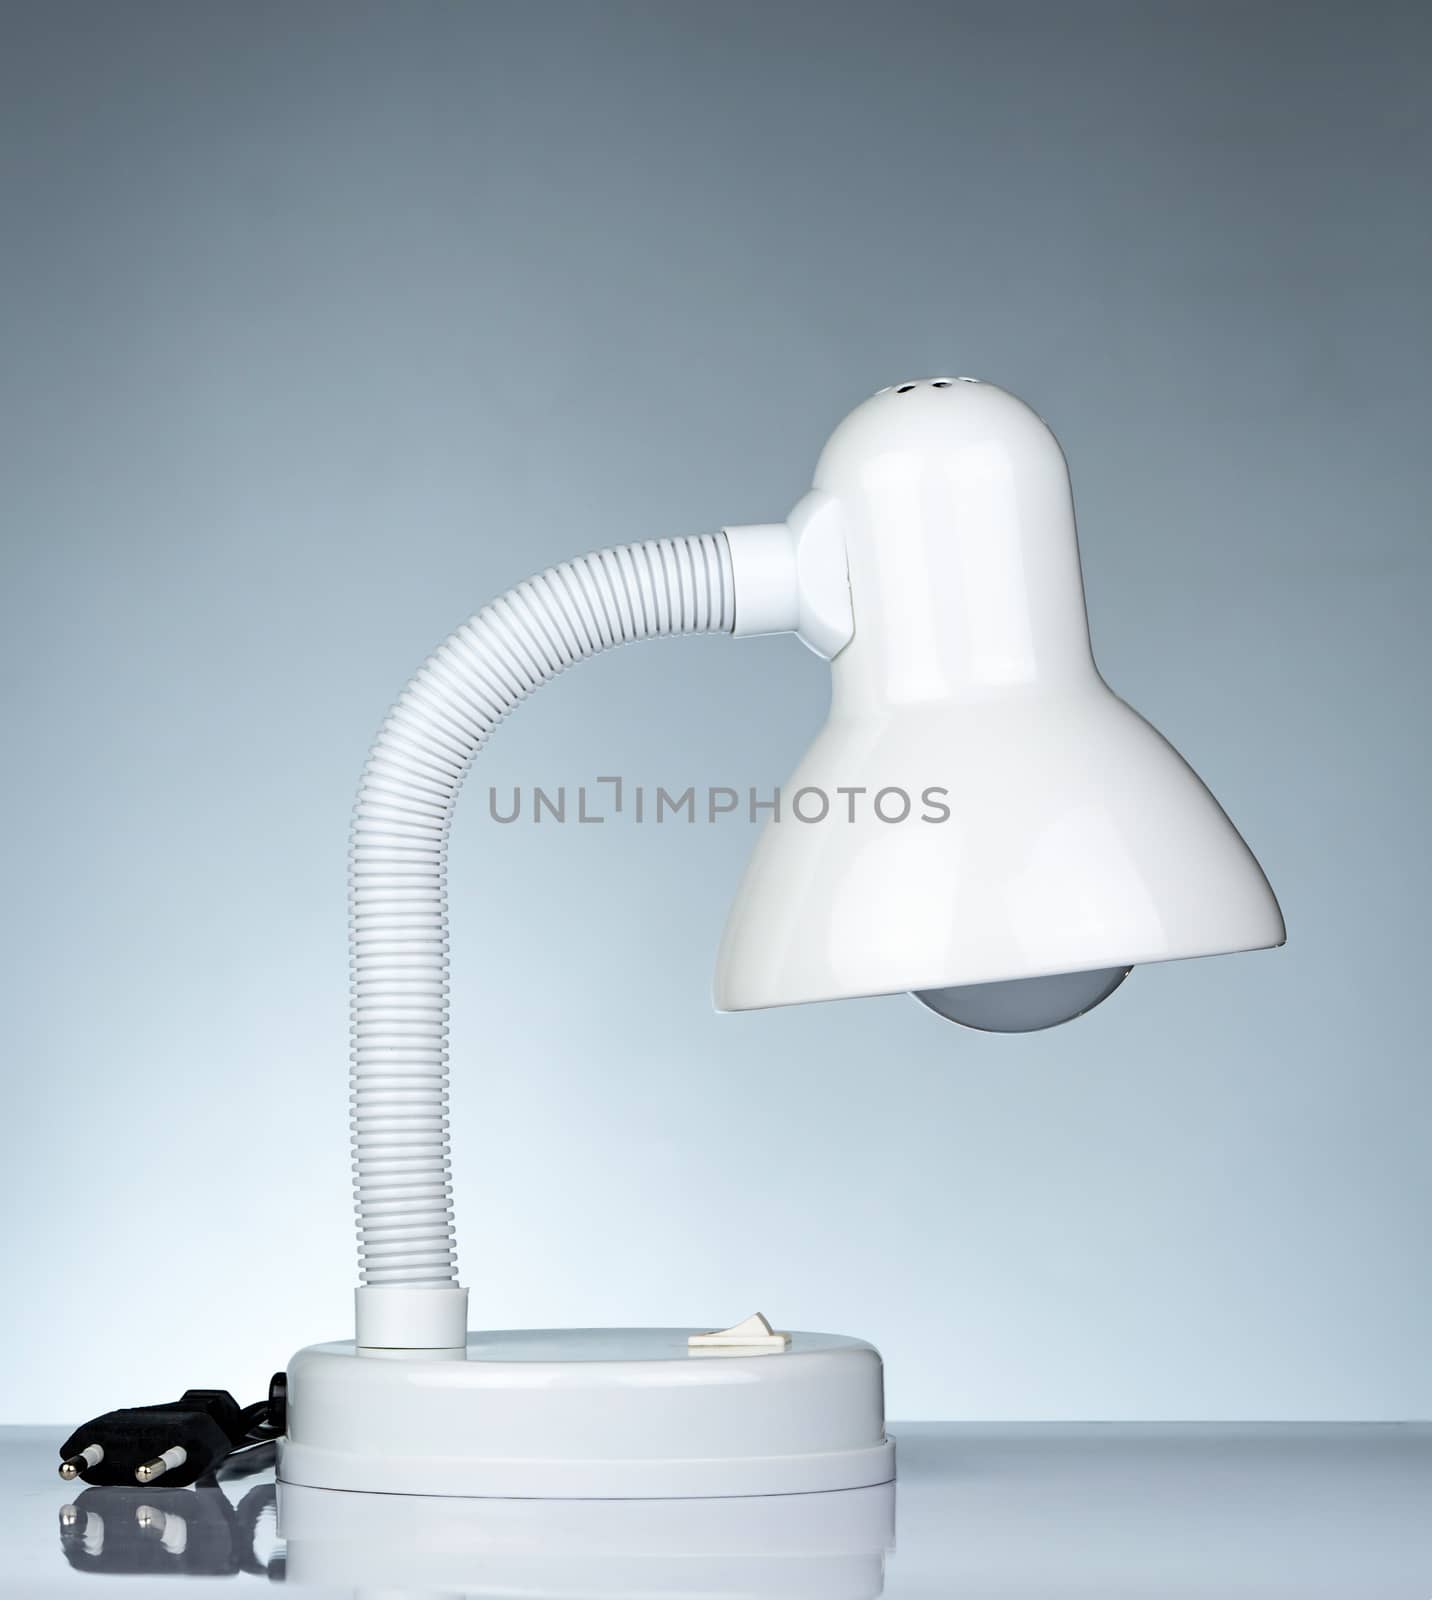 Unplugged white modern table lamp isolated on white table on gra by Fahroni